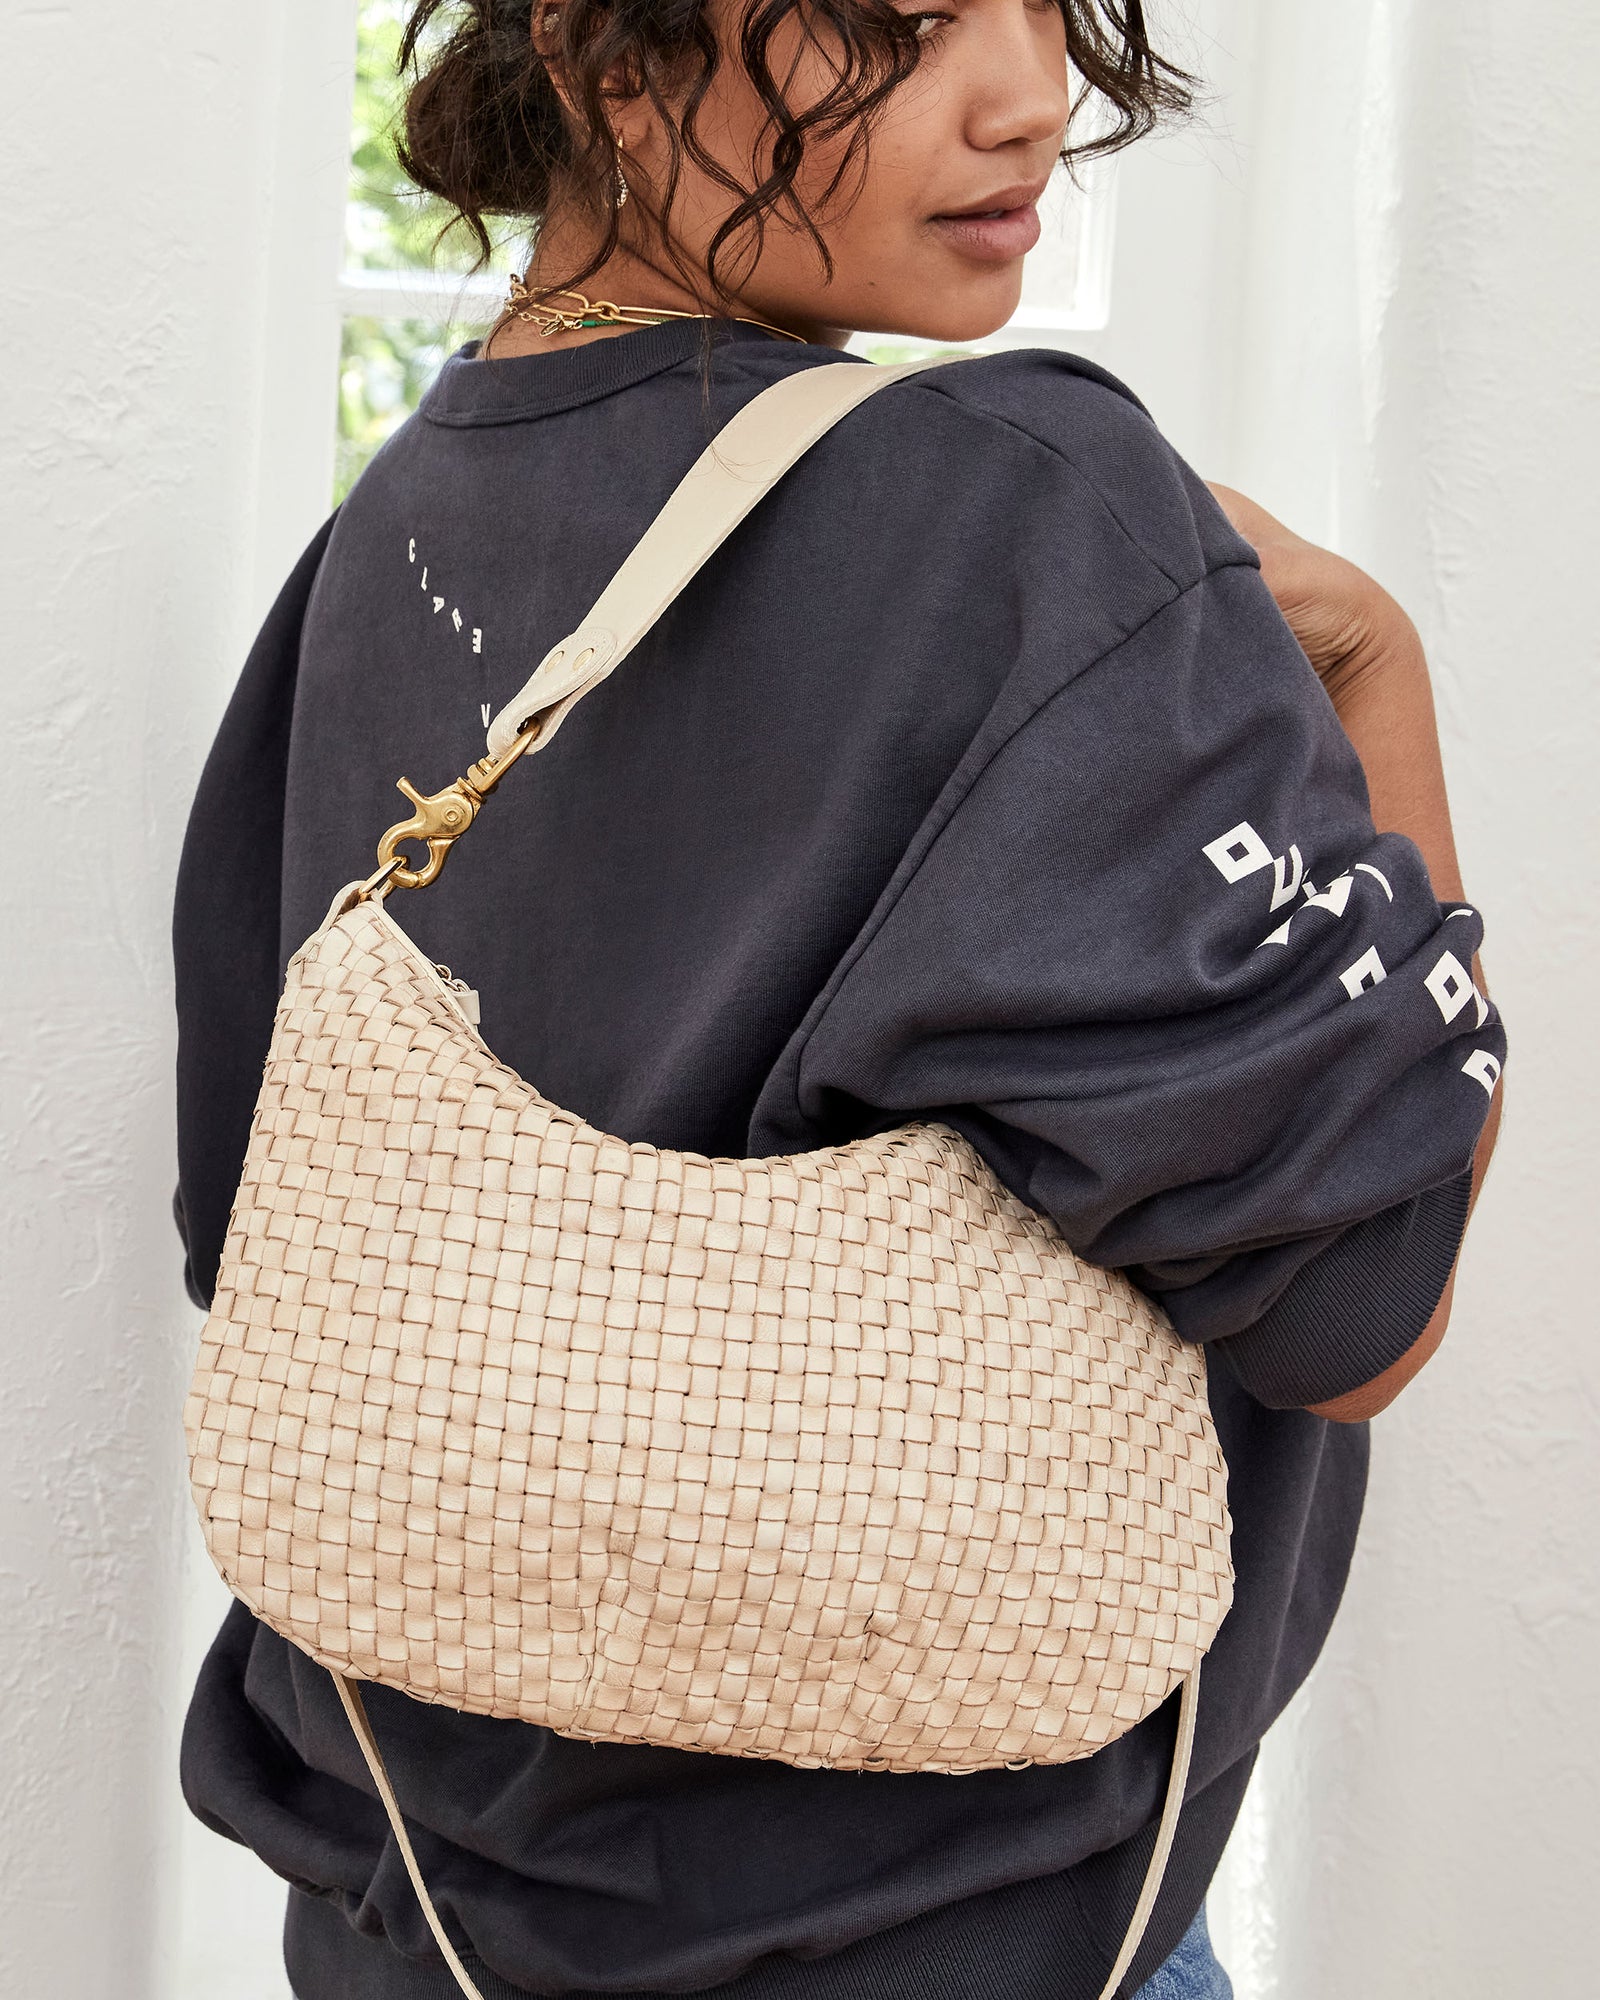 Claudia Carrying the Cream Woven Checker Moyen Messenger with the Shoulder Strap